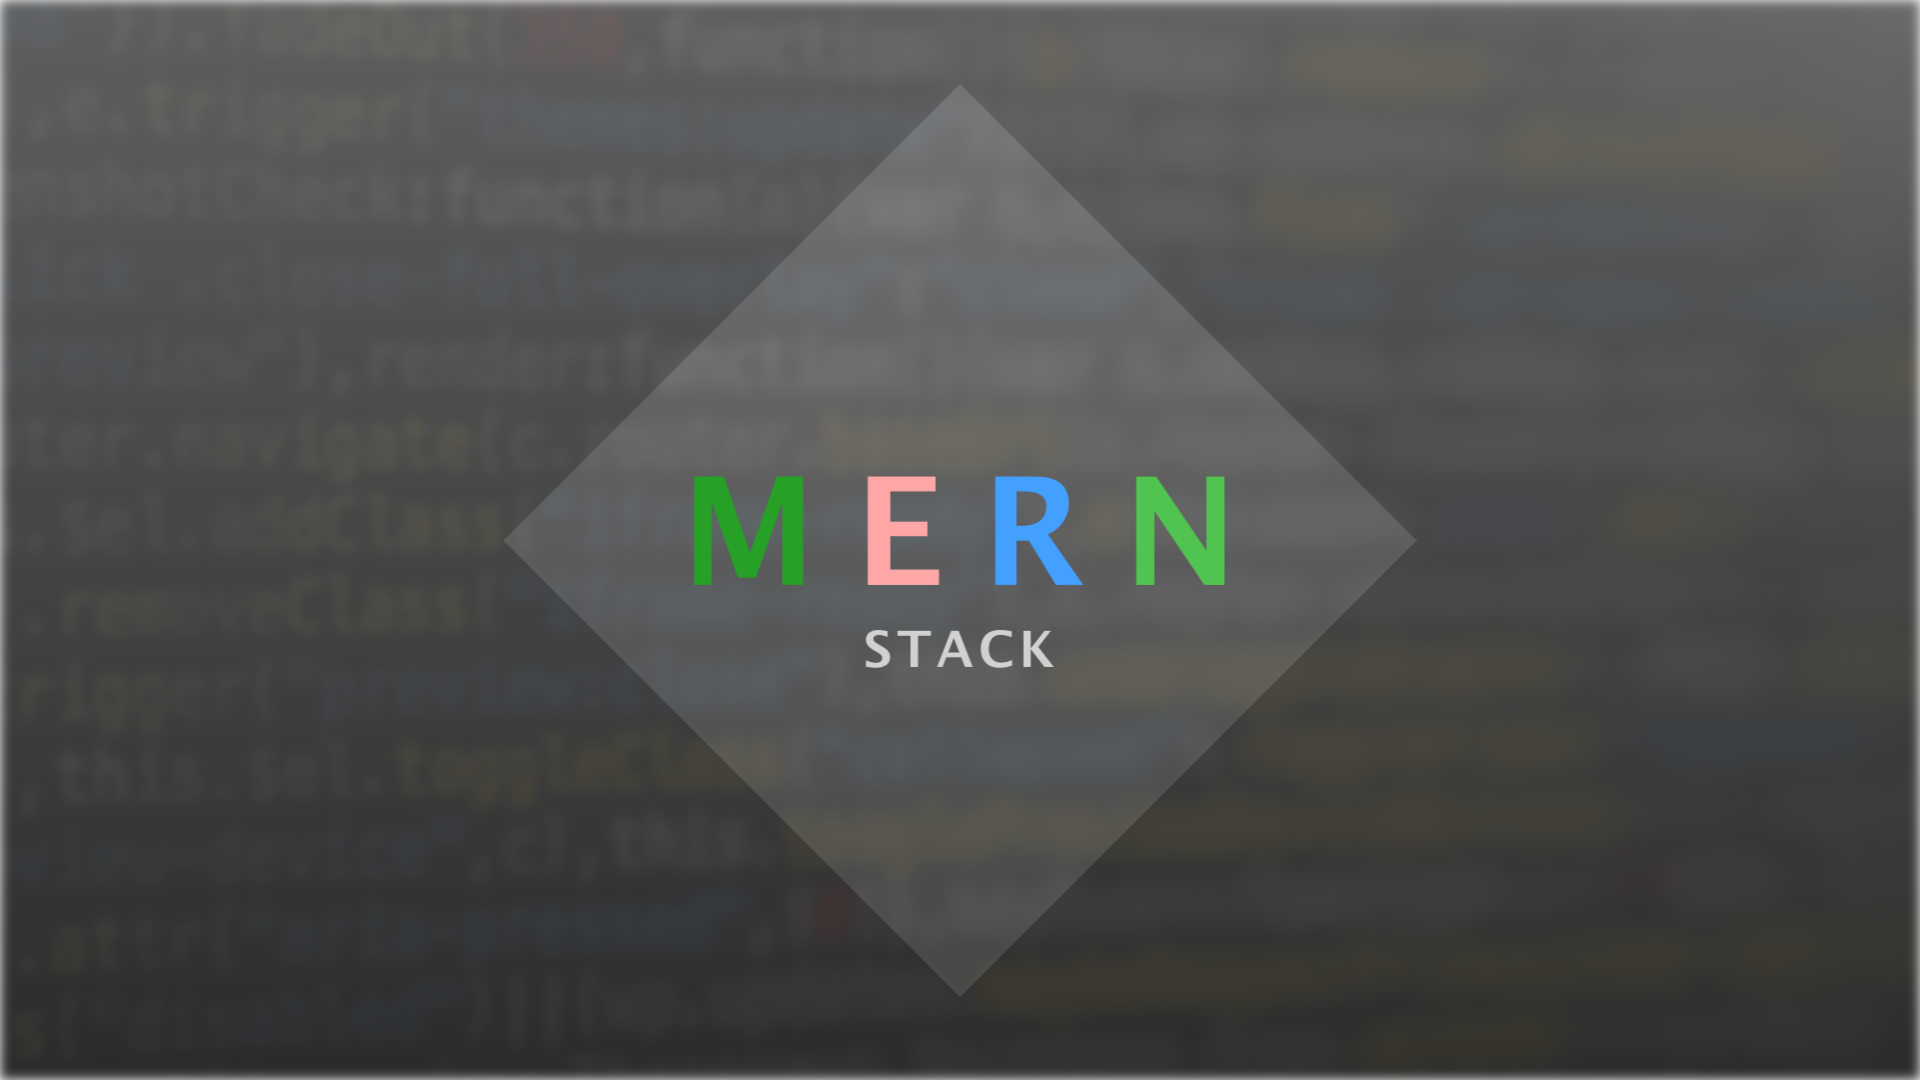 Developing a MERN stack application.